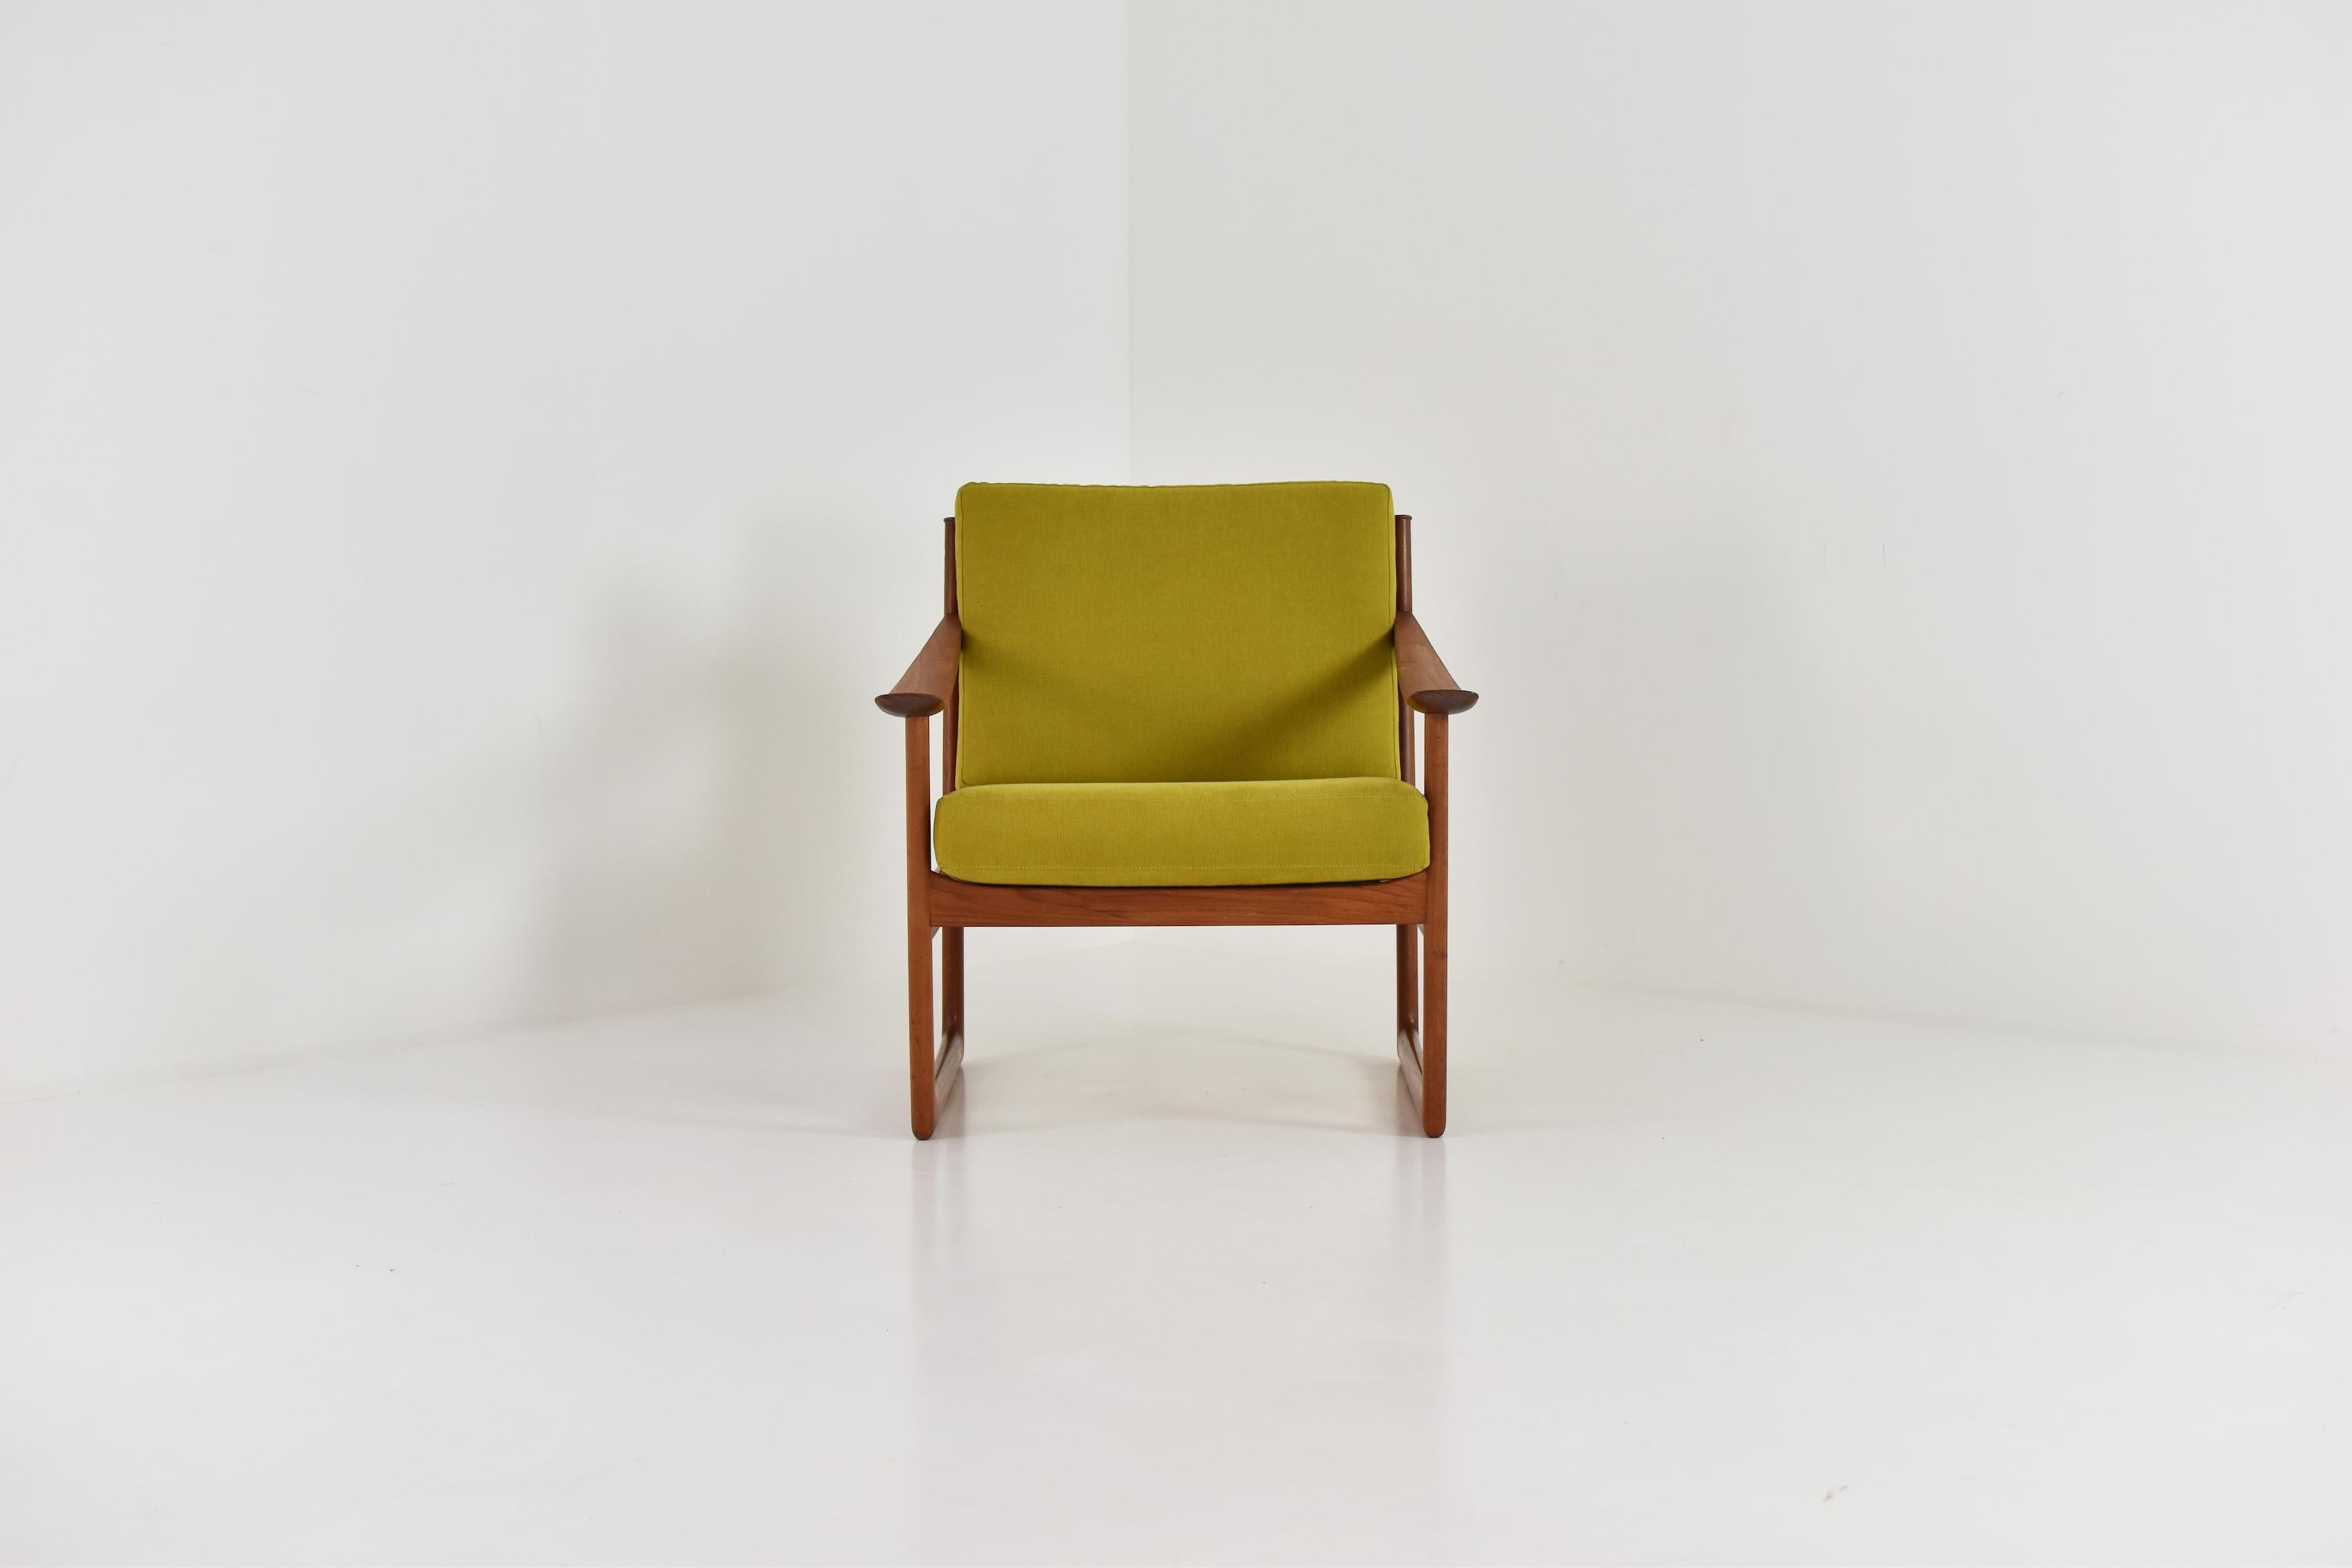 Easy chair by Peter Hvidt and Orla Molgaard-Nielsen for France & Søn, Denmark 1960’s. This is model FD130 made out of teak and the cushions has been professionally re-upholsterd in a mosterd green fabric. Labeled.